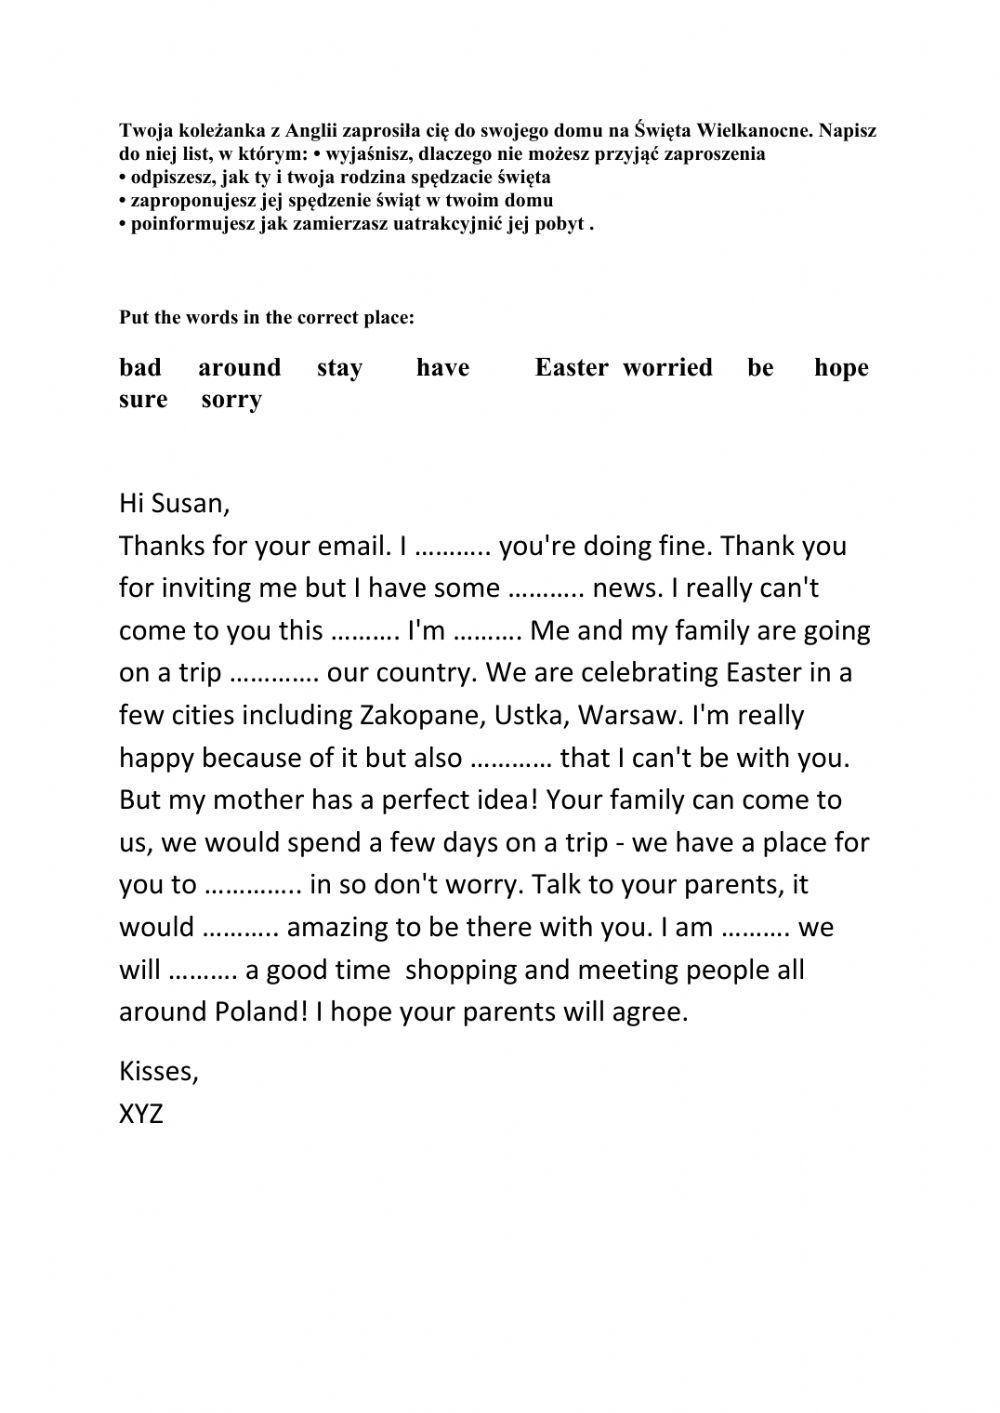 Email about an invitation for Easter